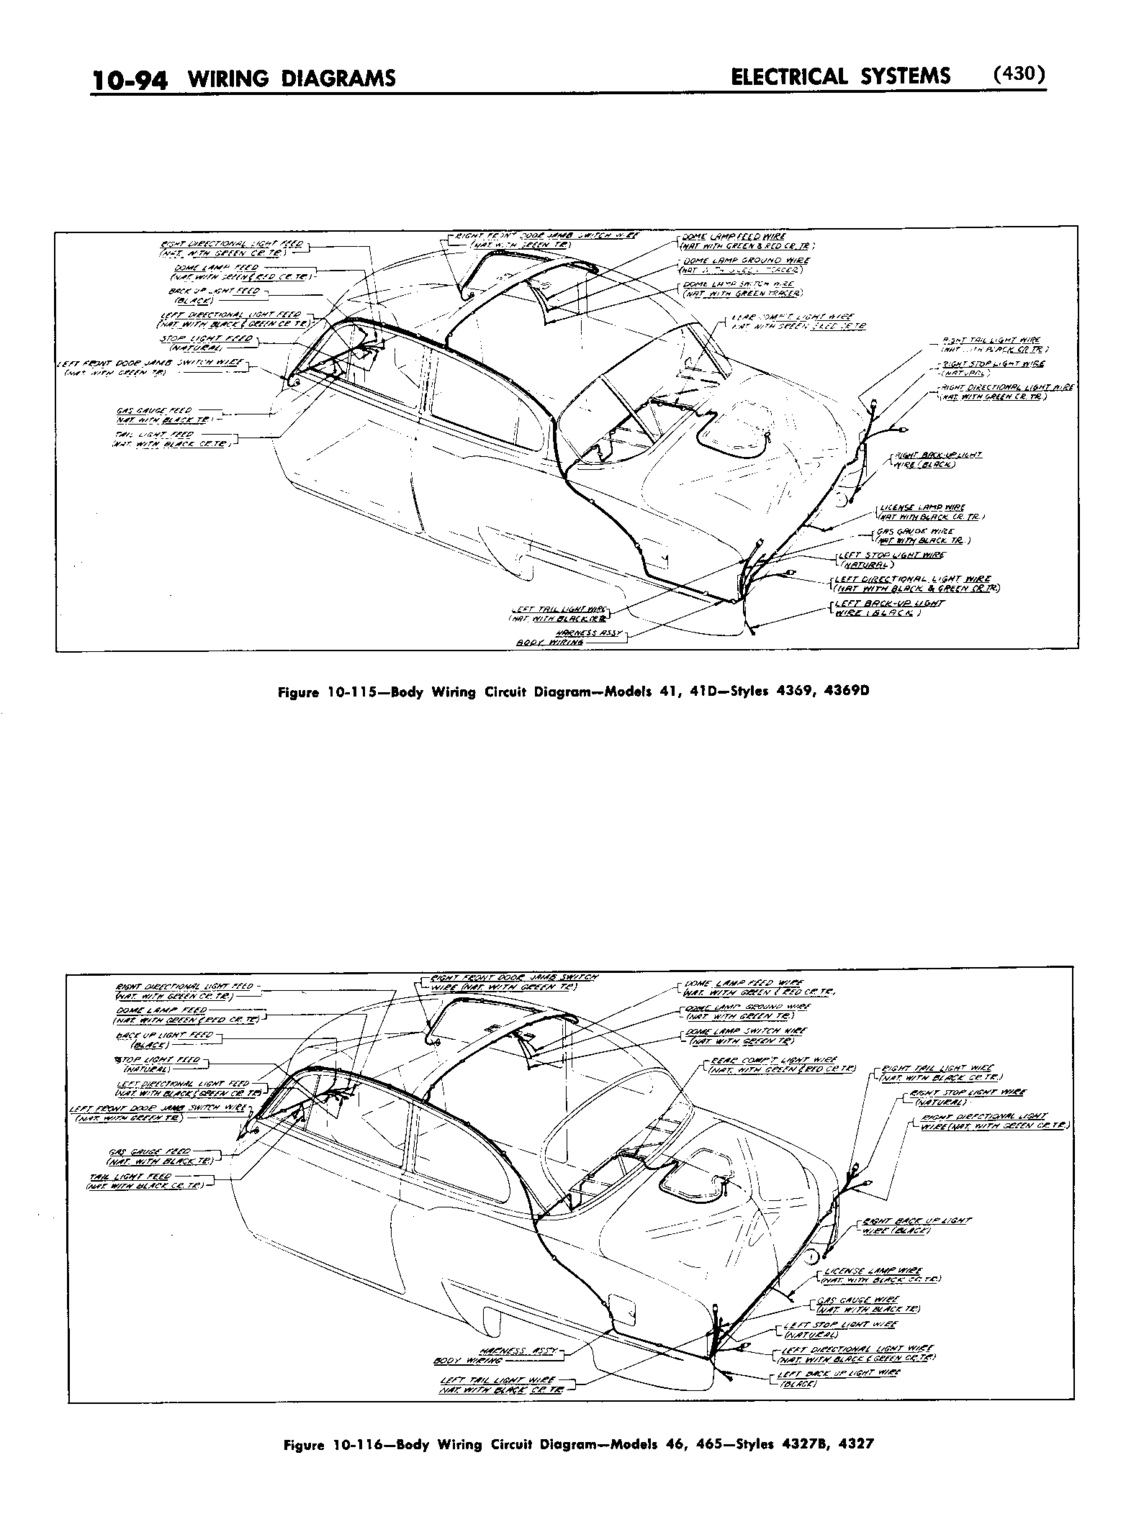 n_11 1952 Buick Shop Manual - Electrical Systems-094-094.jpg